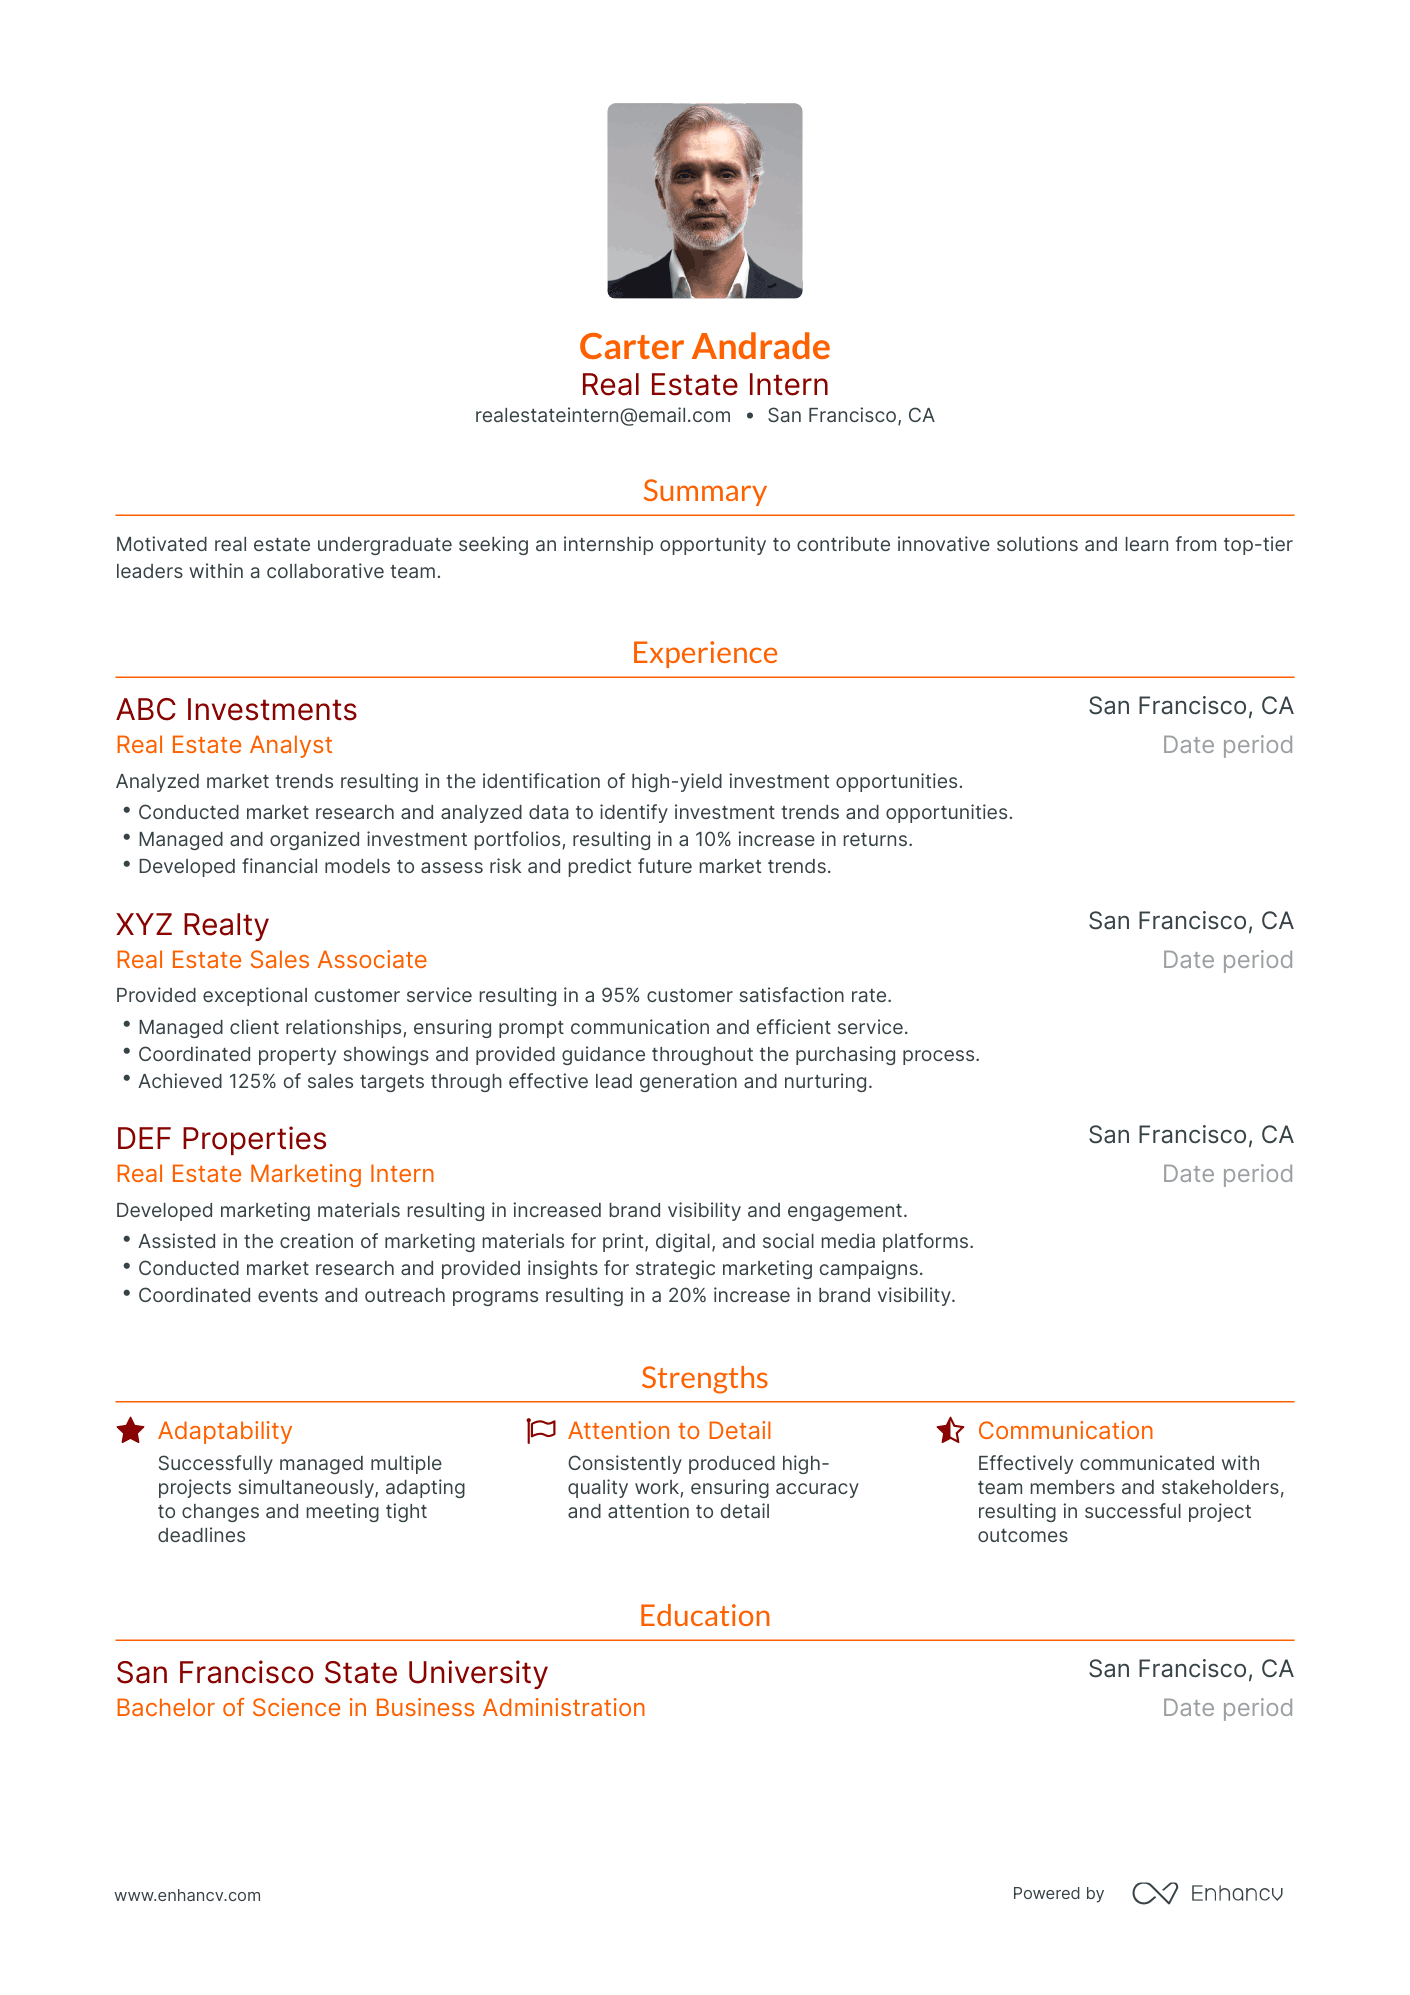 Traditional Real Estate Intern Resume Template